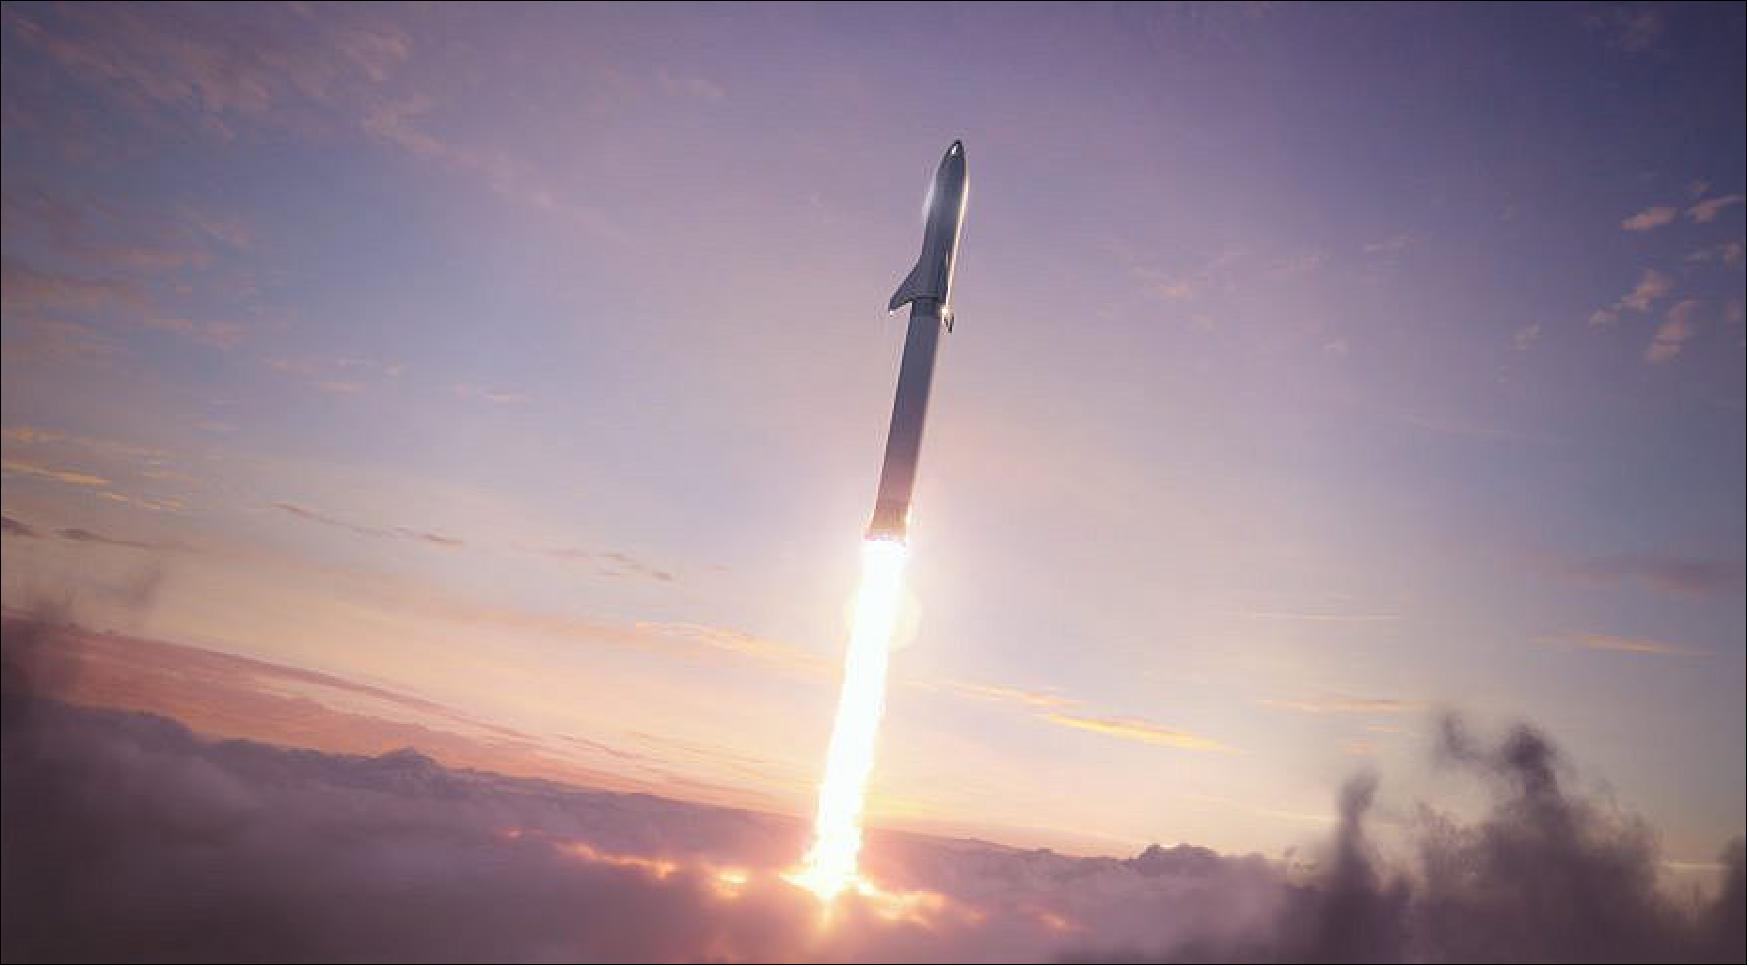 Figure 20: According to a SpaceX application to the FCC, the first orbital test flight of the Starship/Super Heavy system will involve a booster landing in the Gulf of Mexico and a Starship landing in the ocean near Hawaii, to mitigate the risk of a vehicle breakup during reentry (image credit: SpaceX)